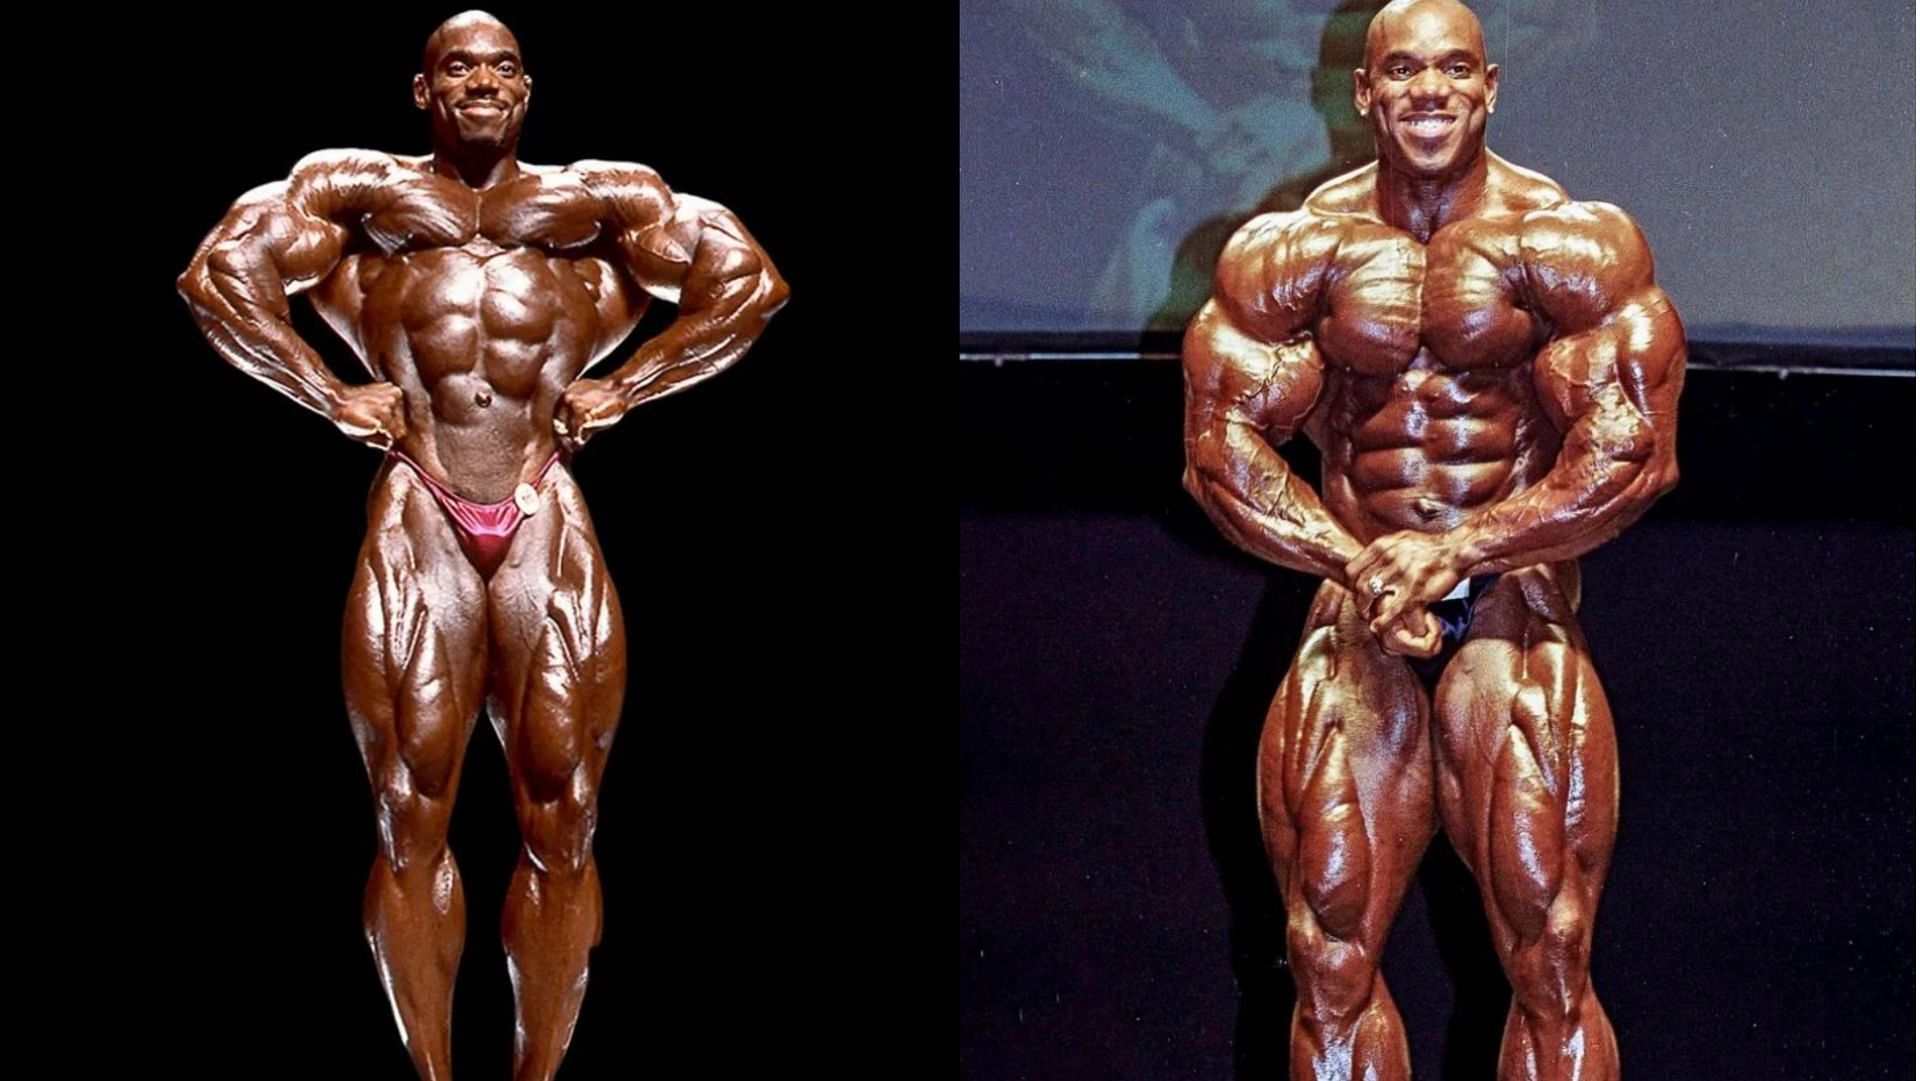 Andrew Jacked Gets Posing Lessons from Bodybuilding Legend Flex Wheeler and  Milos Sarcev Ahead of 2022 Texas Pro – Fitness Volt